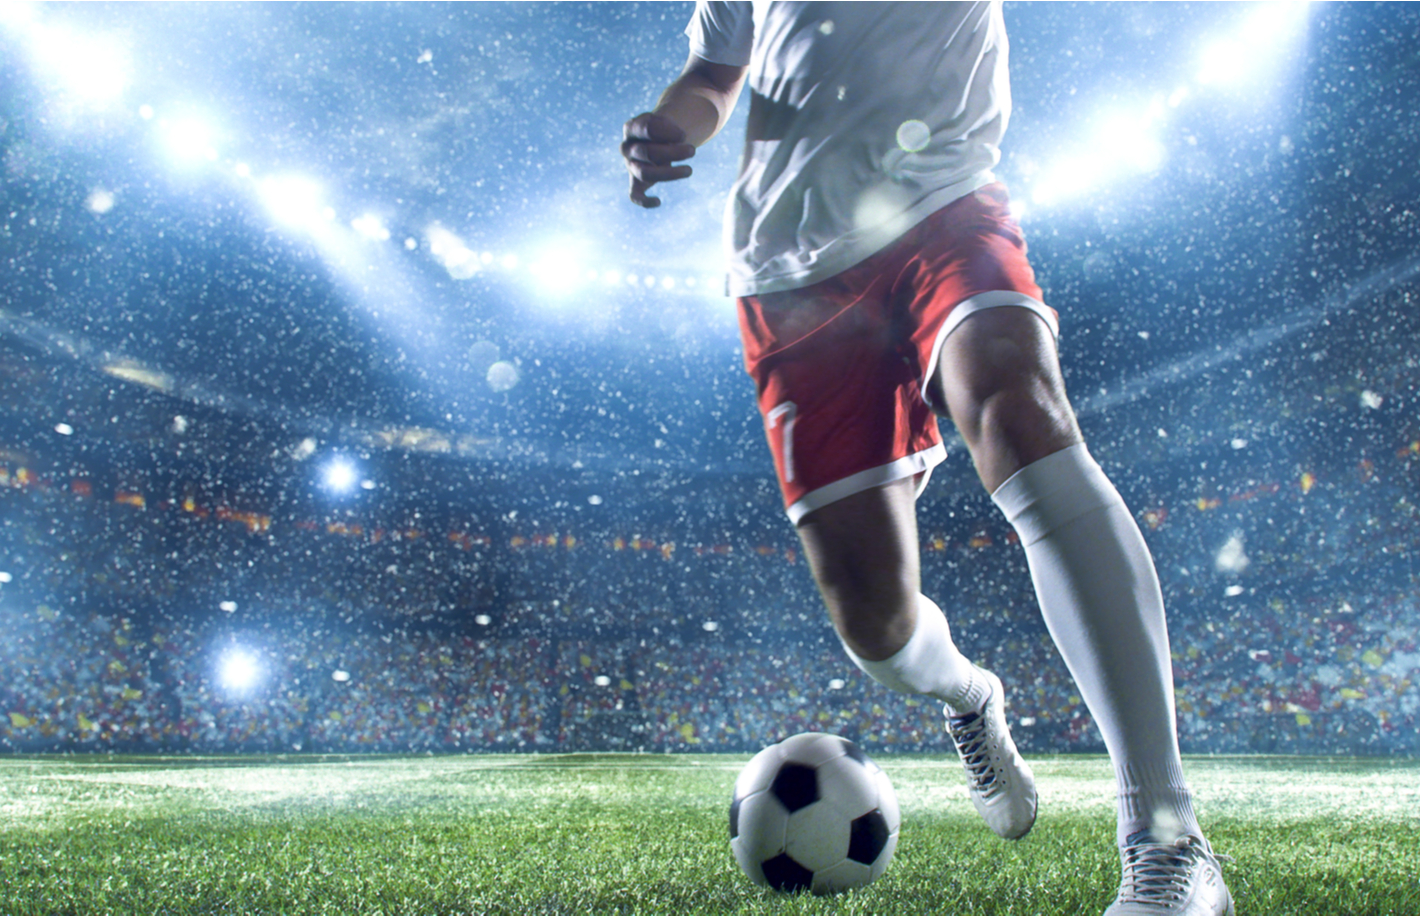 Blockchain-enabled-fantasy-soccer-firm-sorare-raises-$4m-in-seed-fund-round